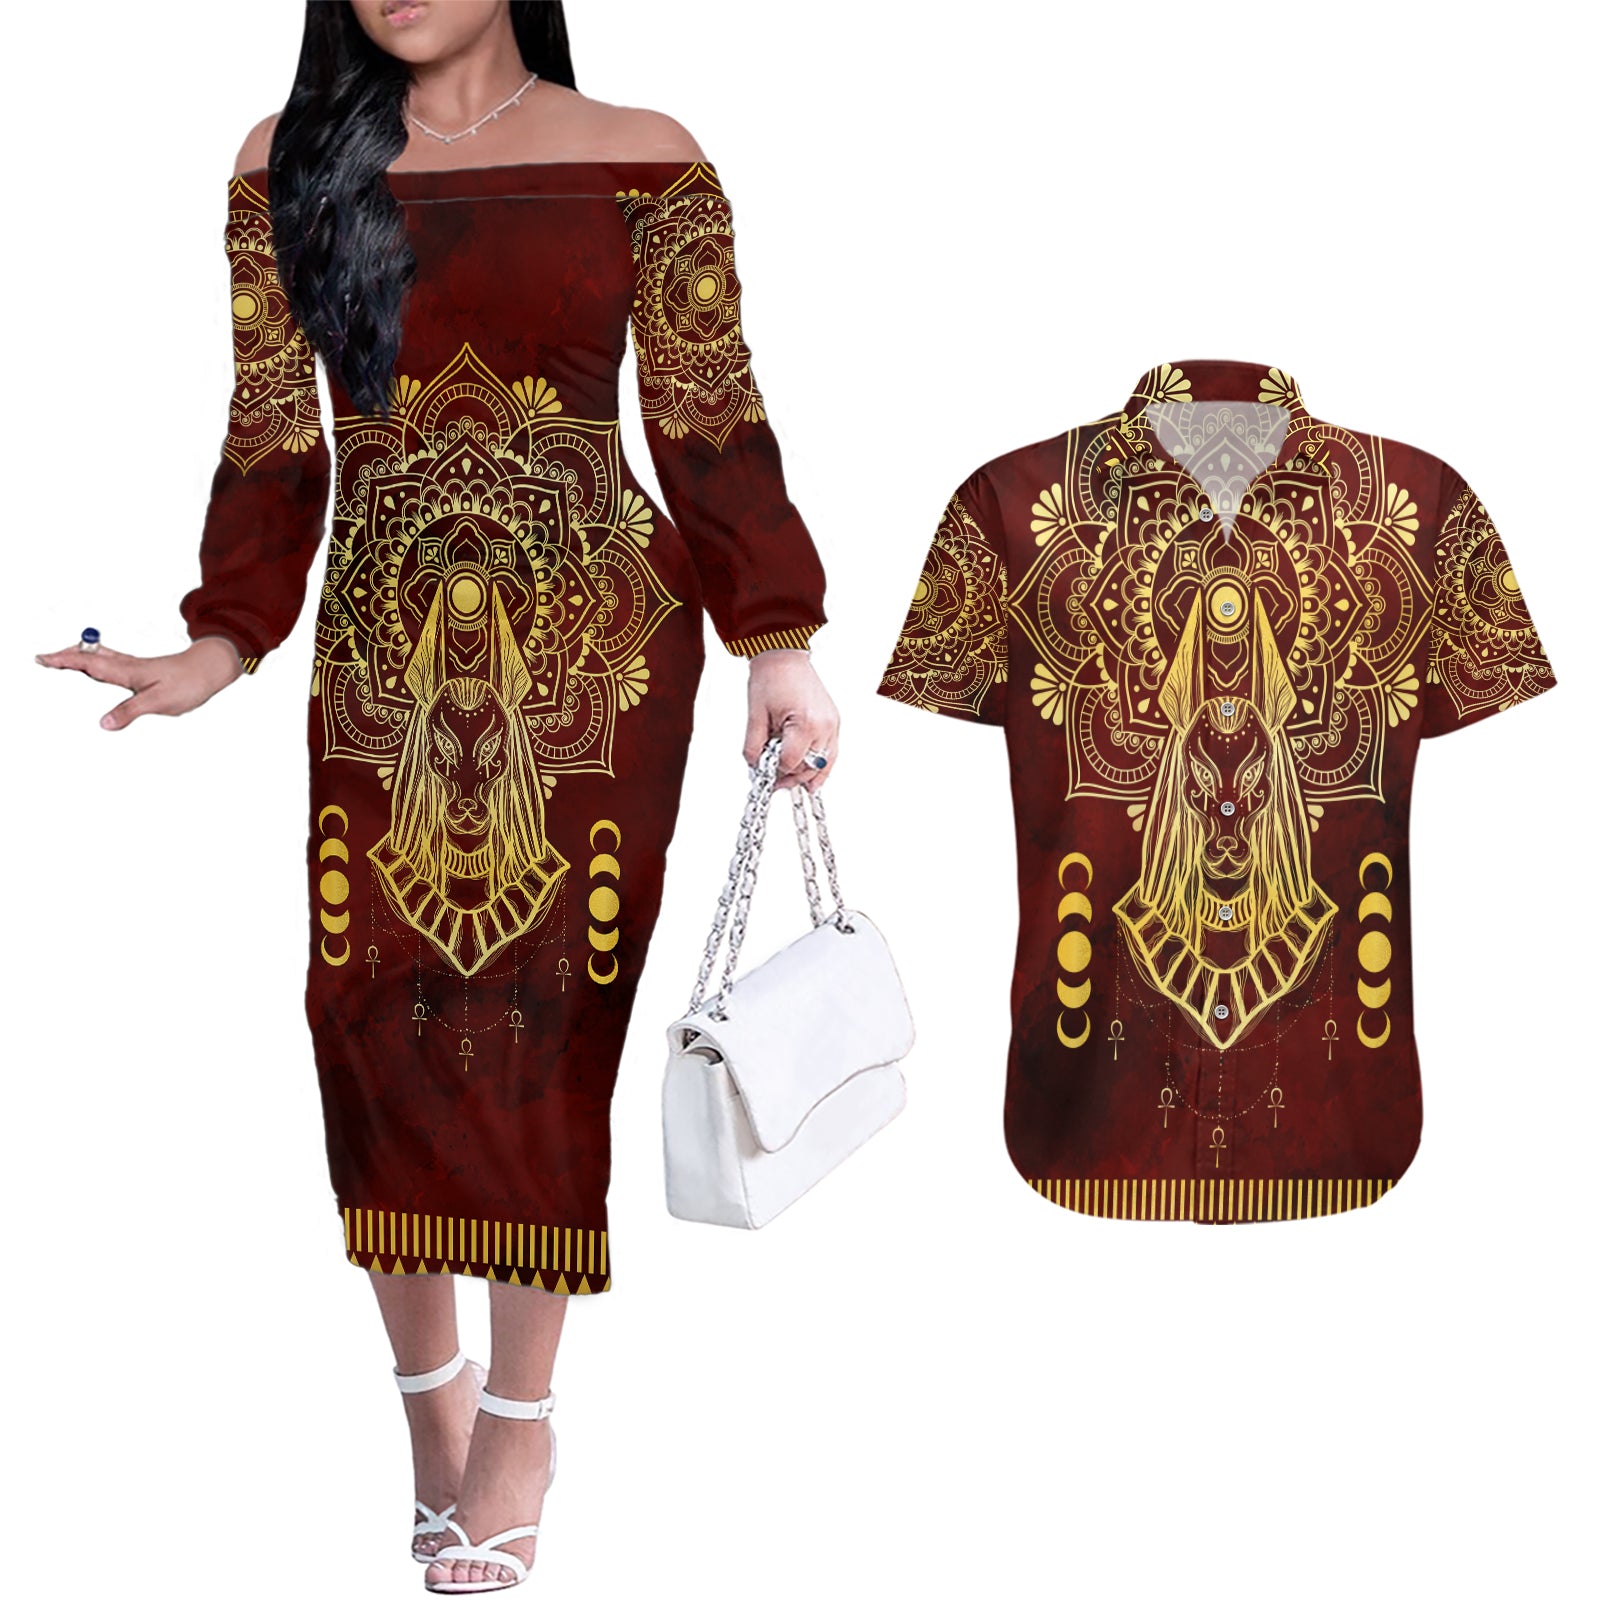 Personalized Anubis Couples Matching Off The Shoulder Long Sleeve Dress and Hawaiian Shirt Ancient Egyptian Pattern In Red